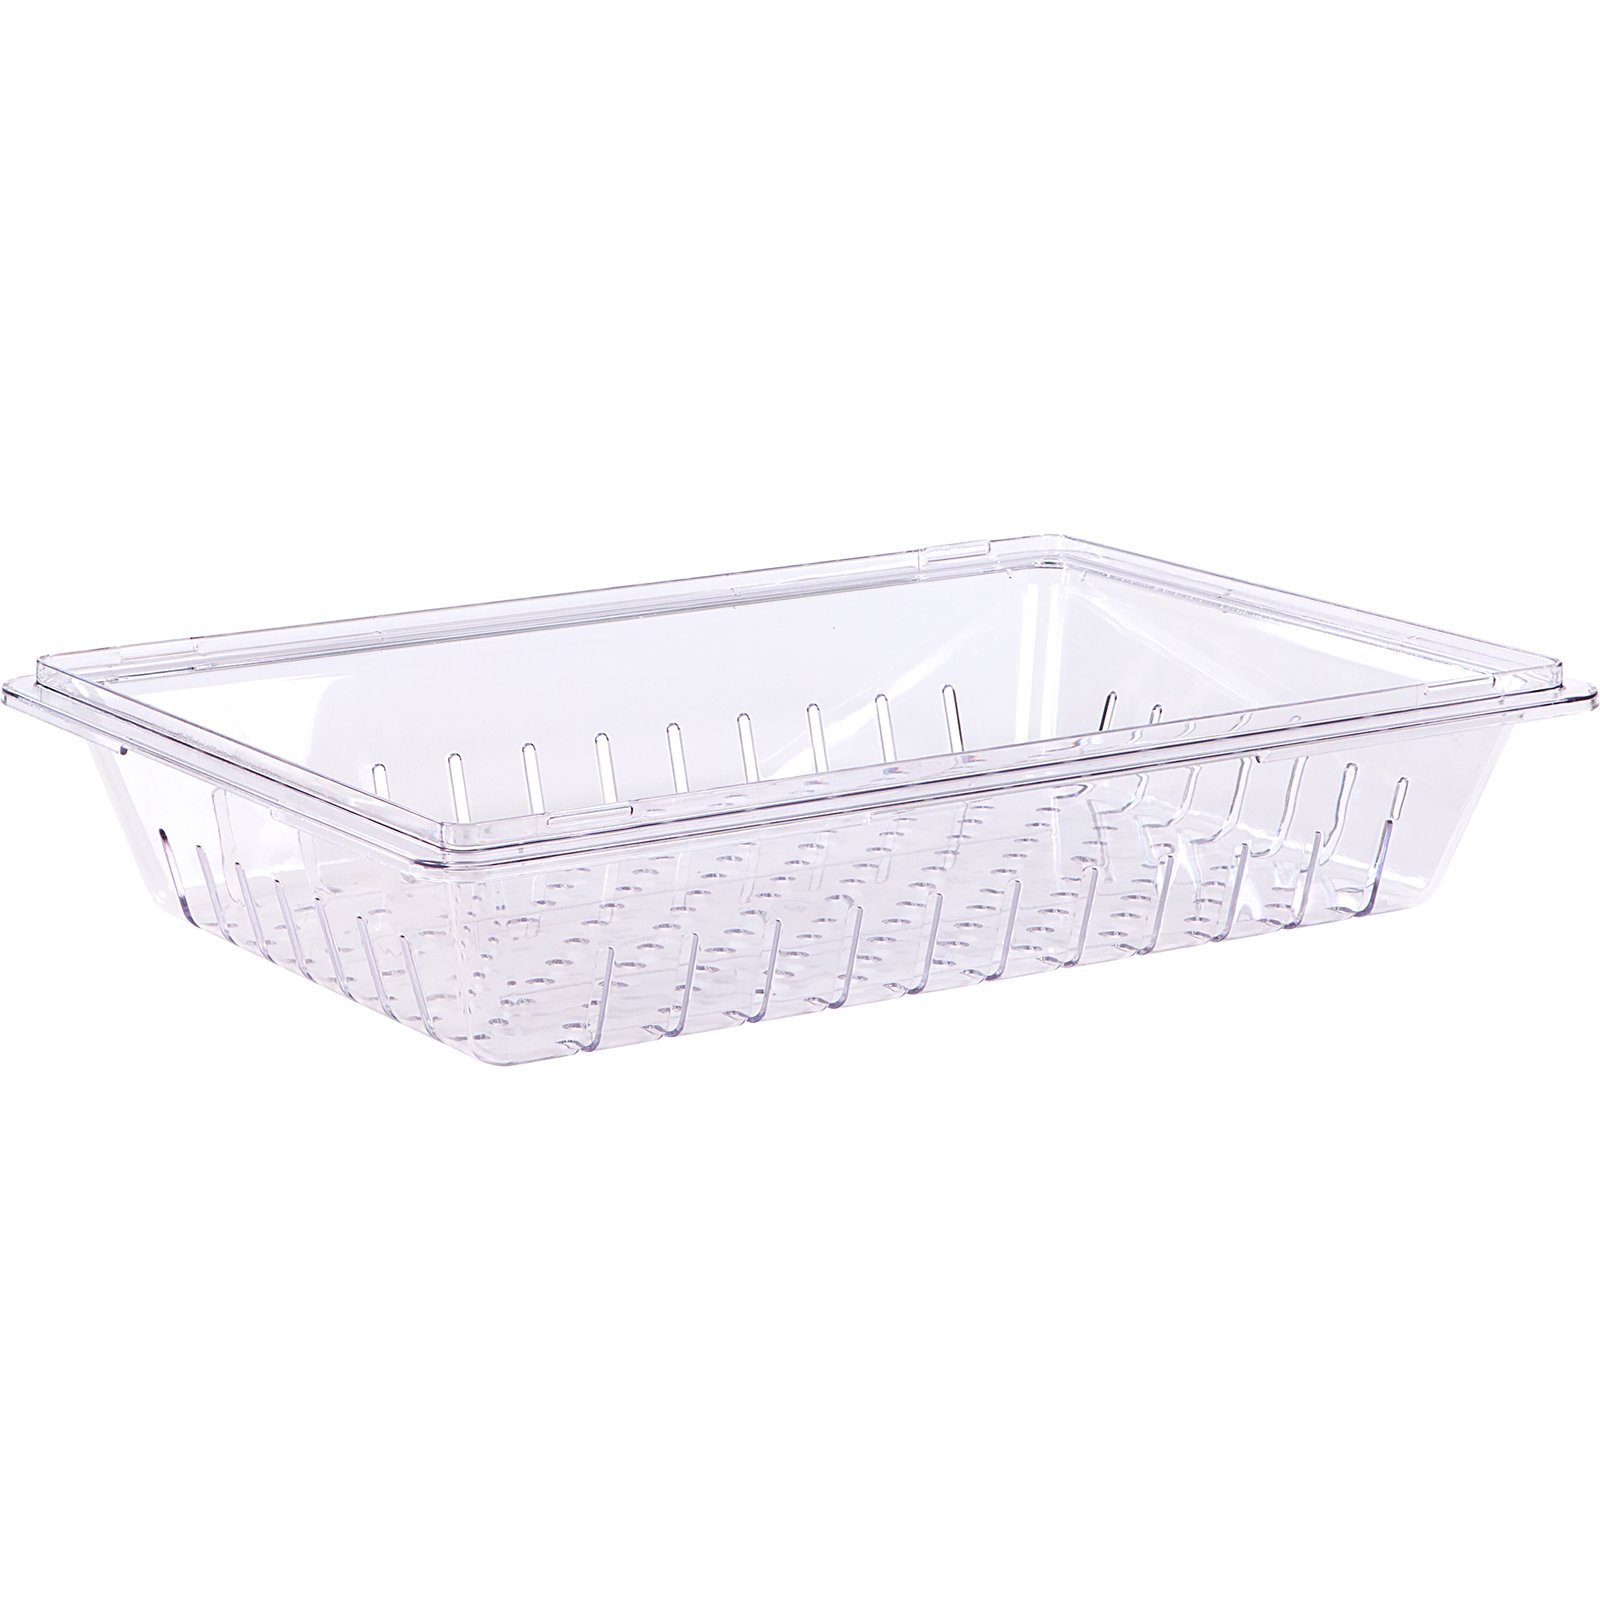 Vigor 18 x 12 x 6 Clear Polycarbonate Food Storage Box with Lid - 6/Pack